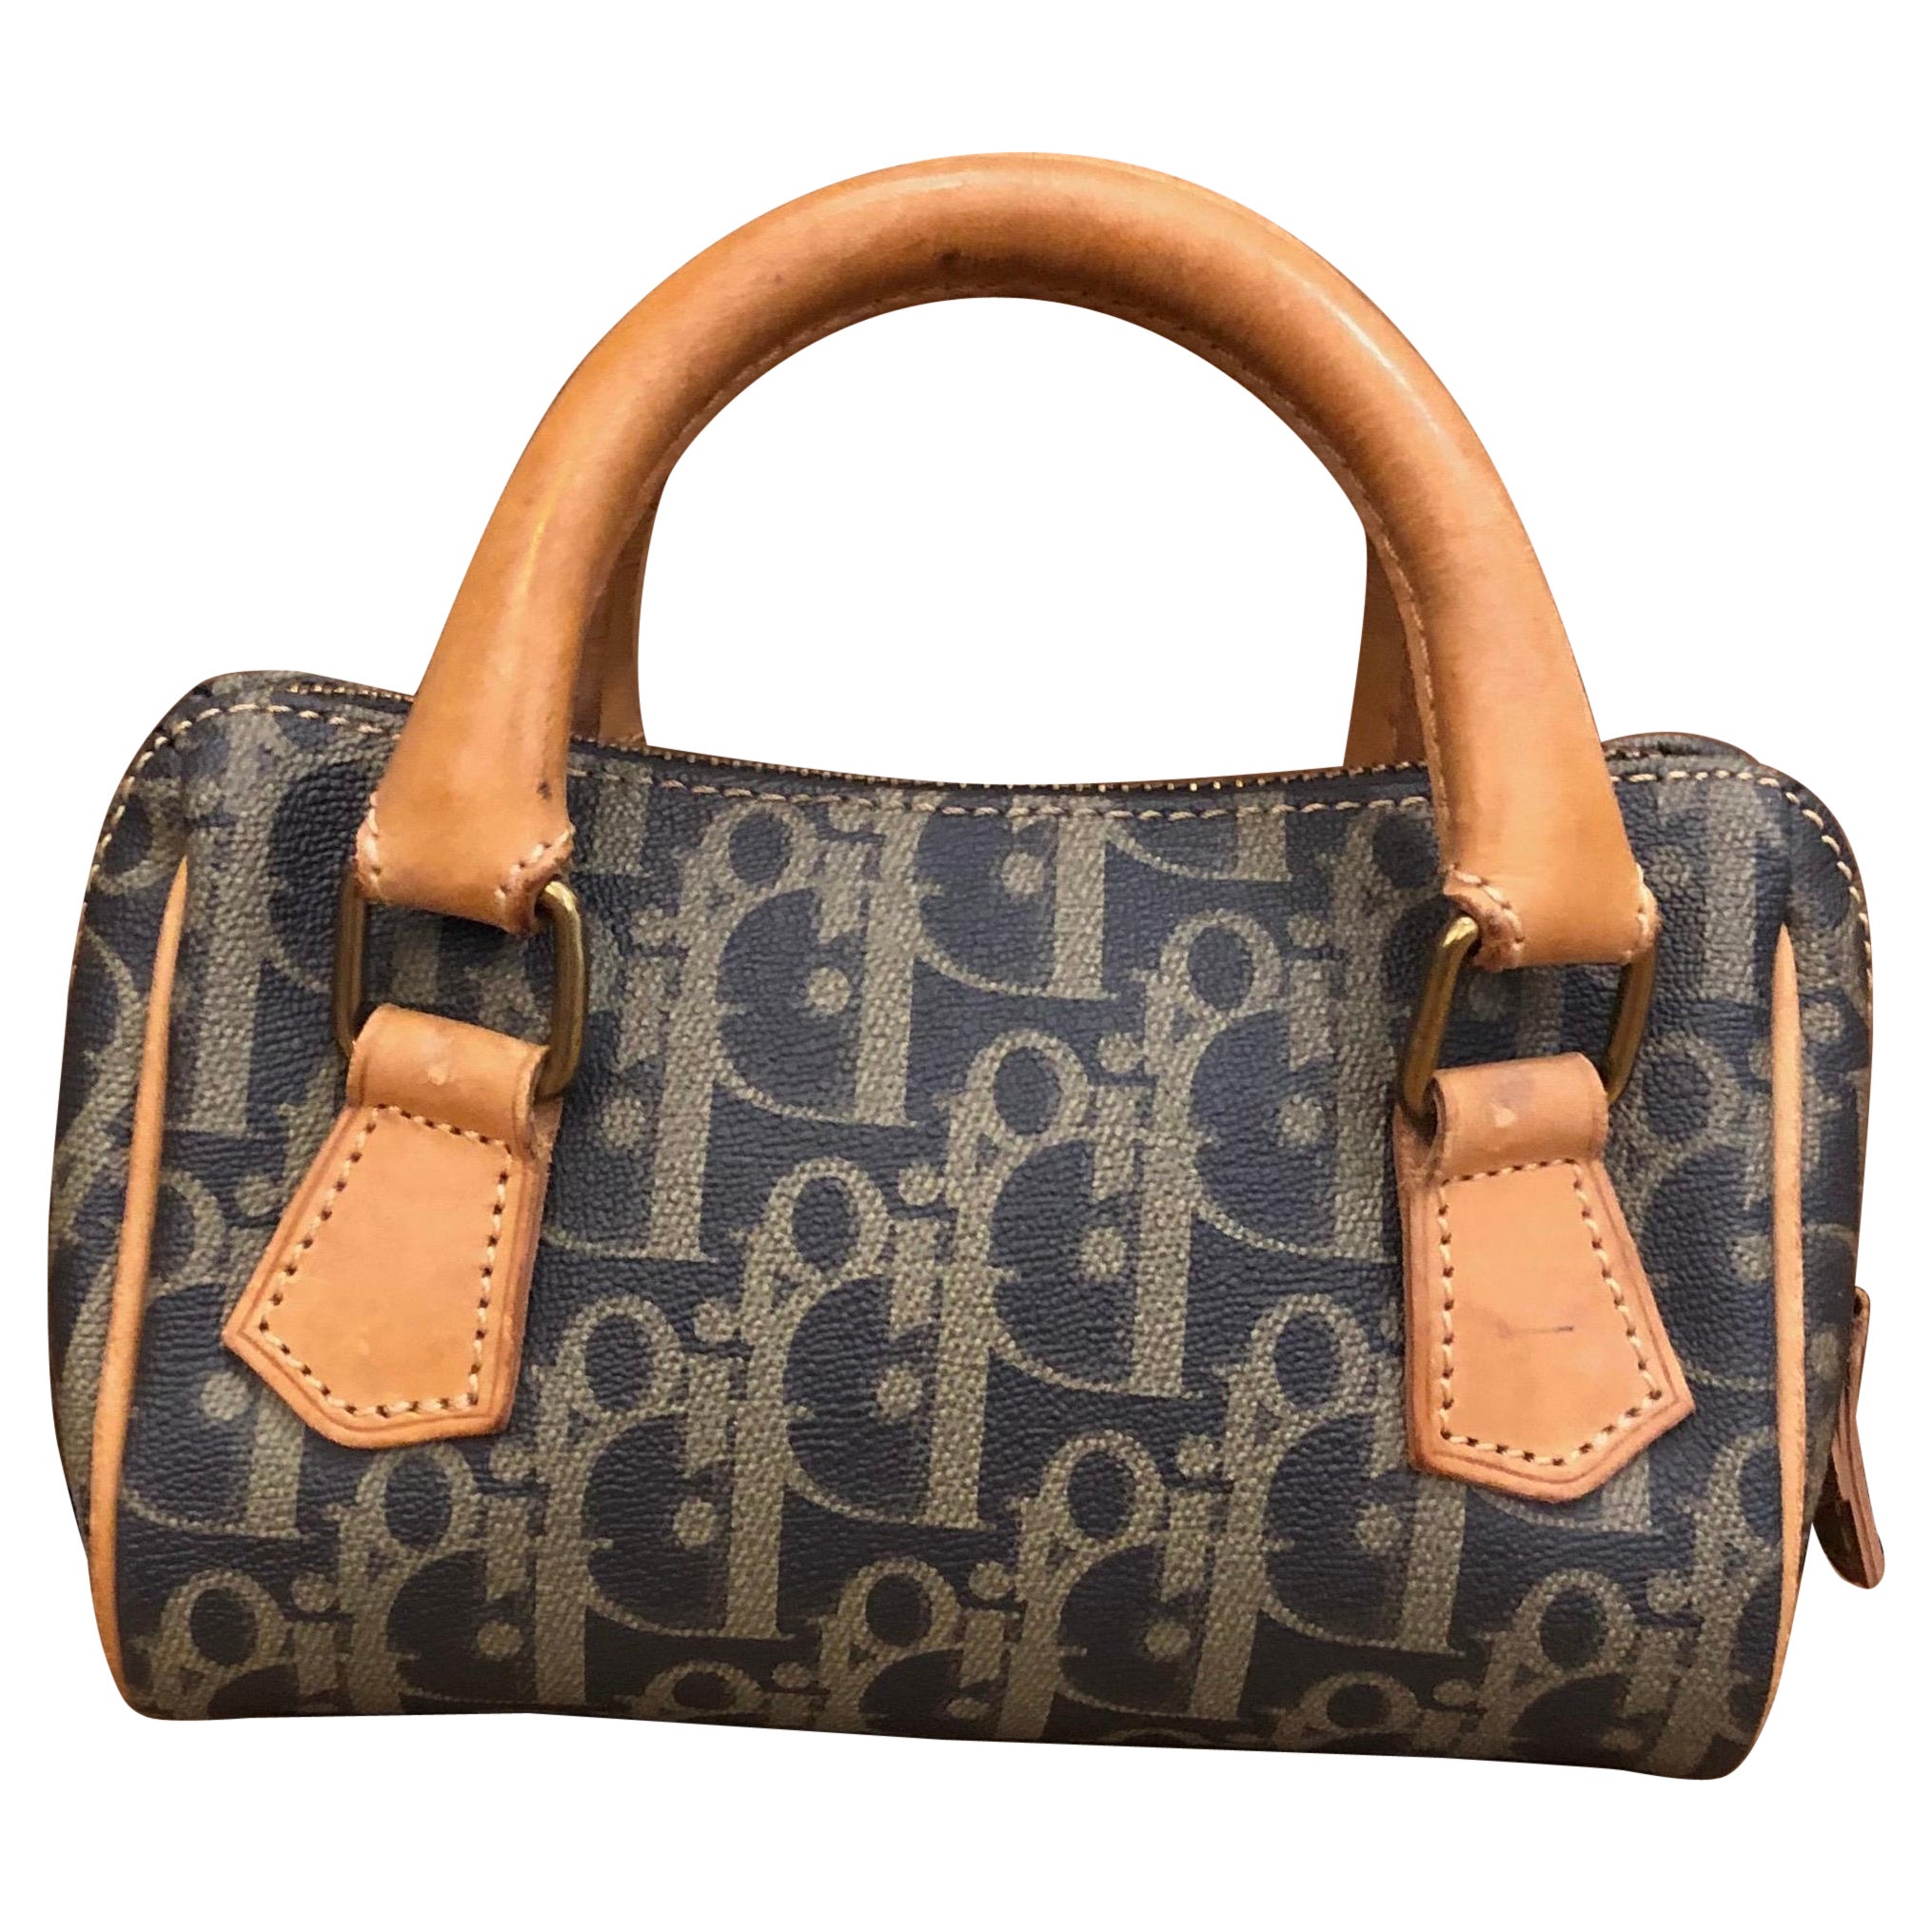 Authentic Christian Dior Brown Trotter Print Canvas Boston Bag